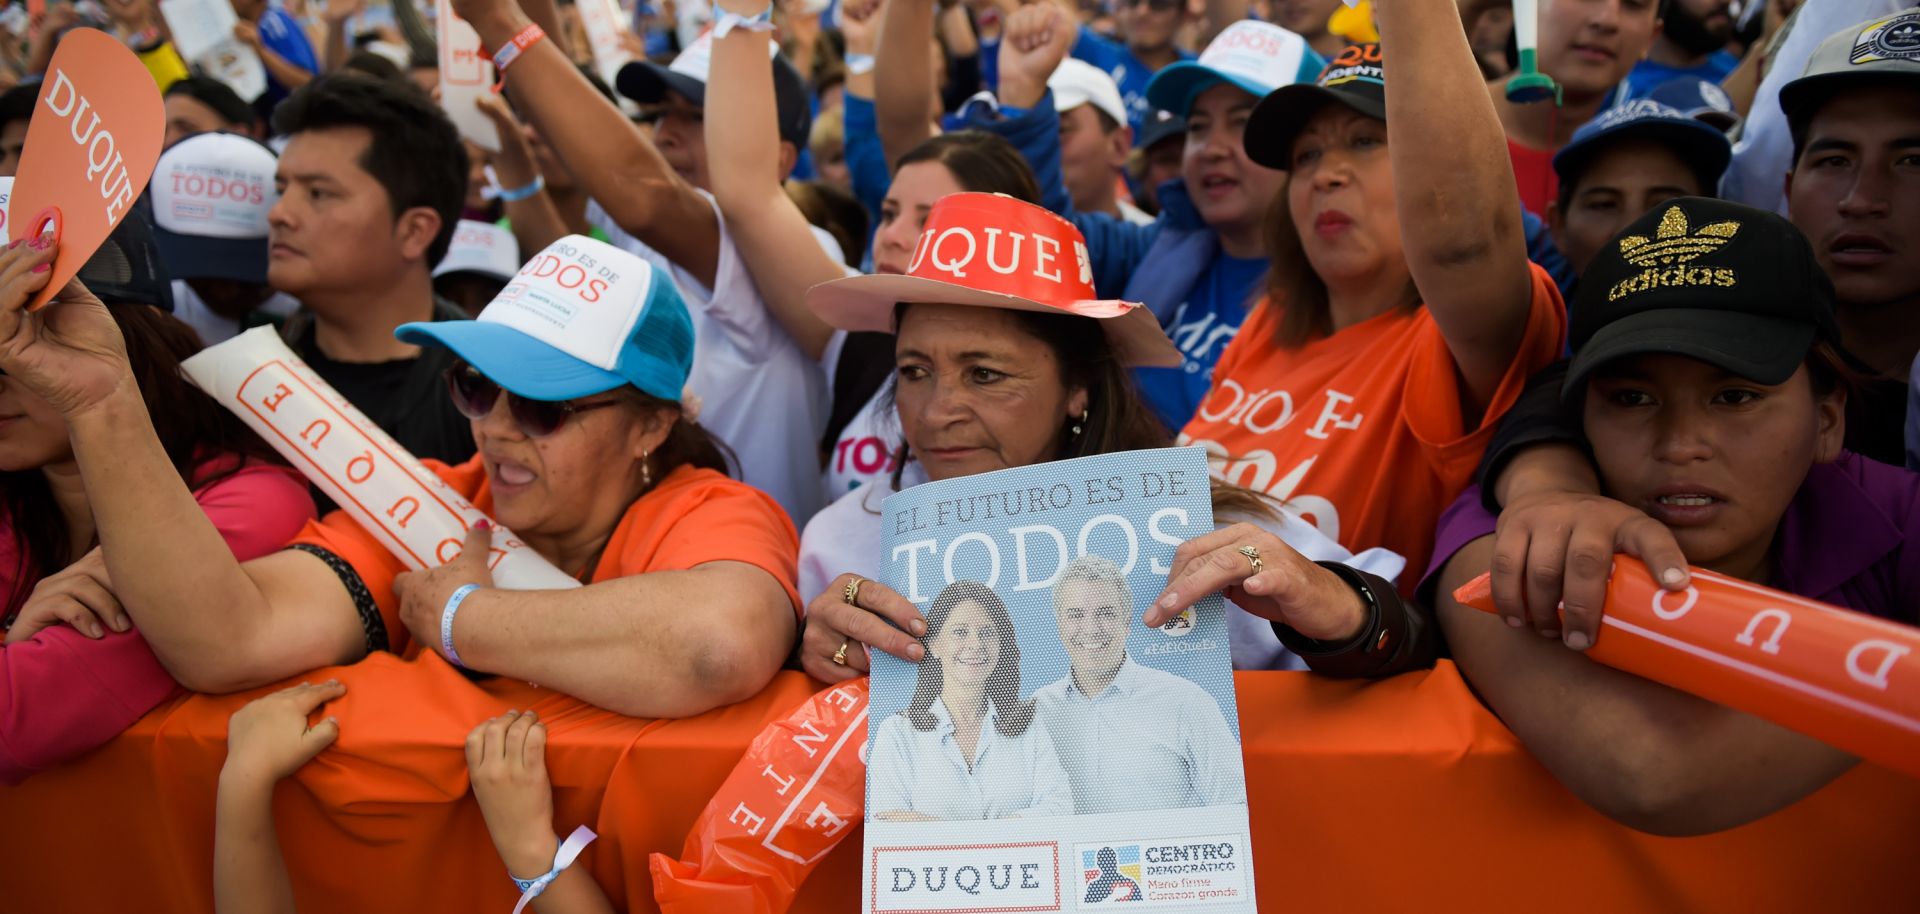 Supporters of Colombian presidential candidate Ivan Duque attend his final campaign rally in Bogota on May 20, ahead of the May 27 presidential election.